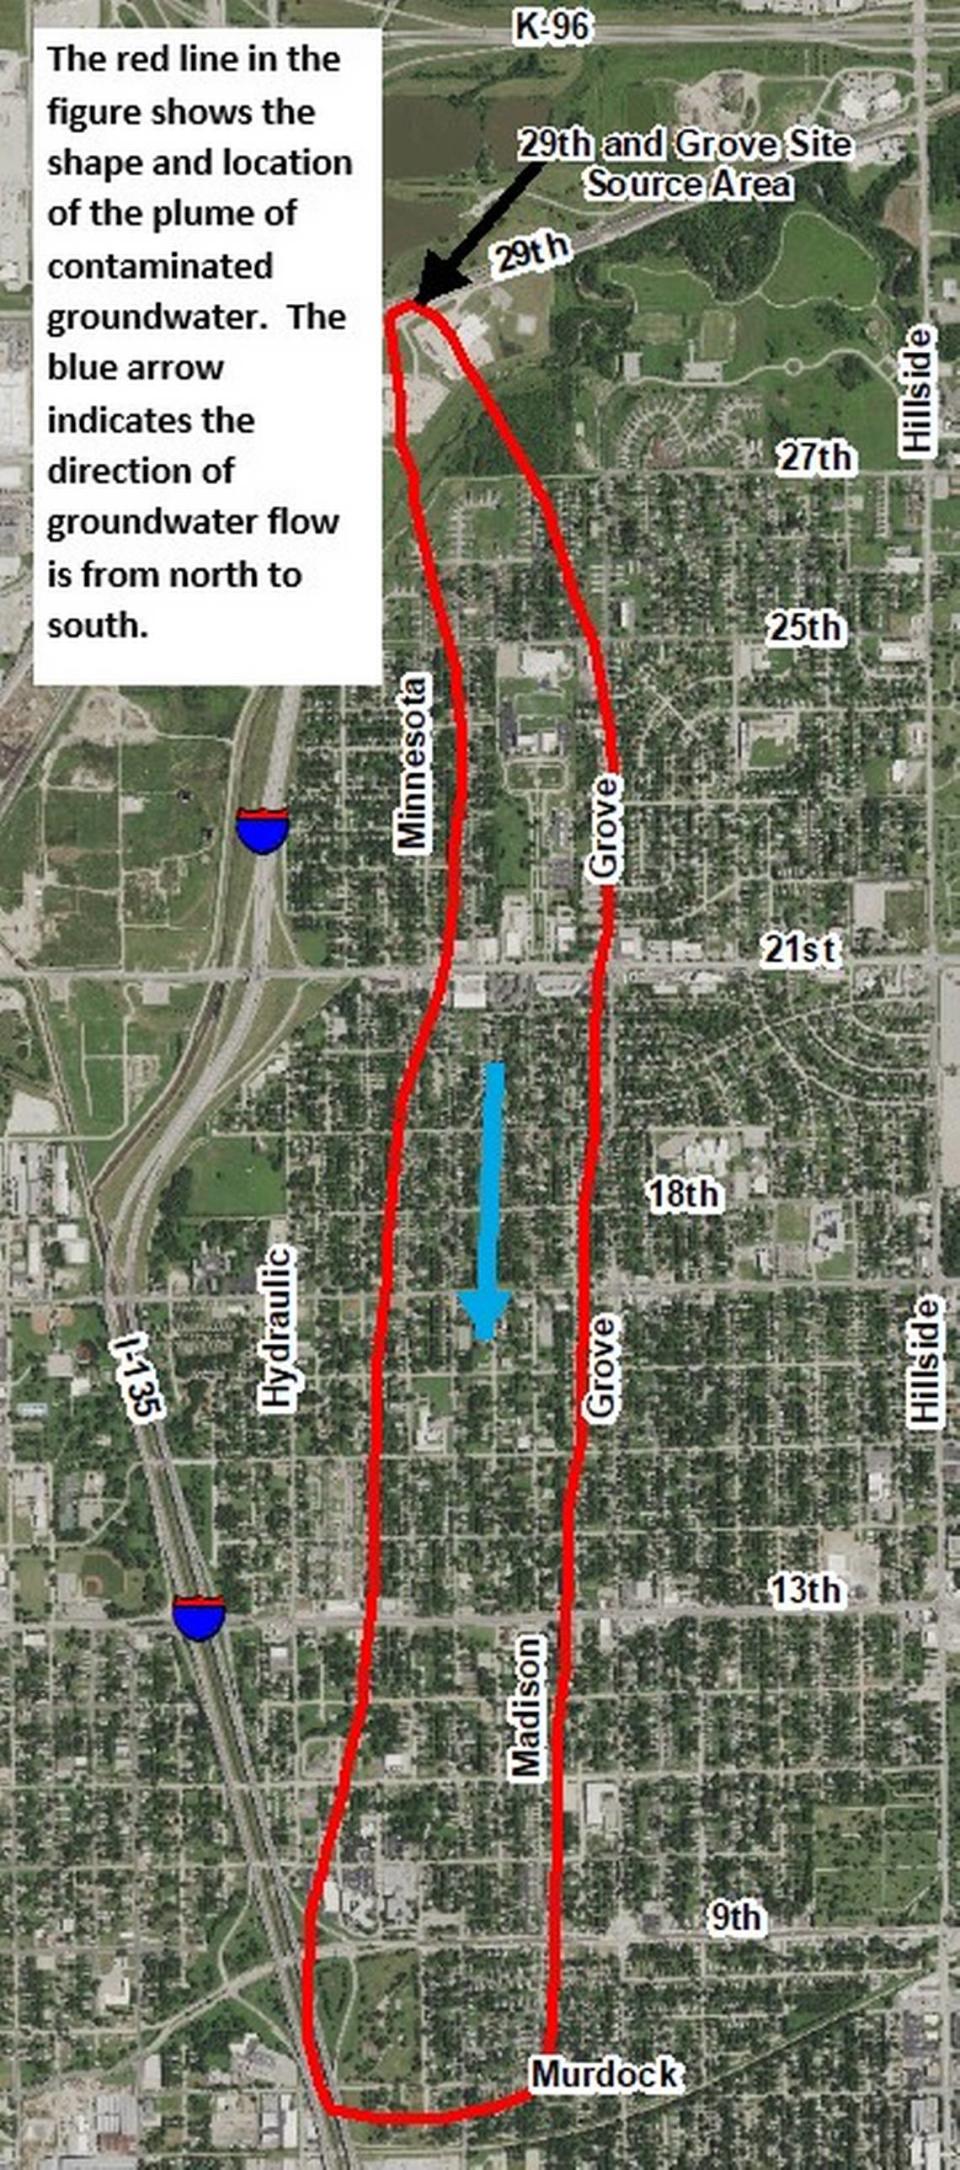 This map shows the boundaries of the 29th and Grove contamination site in Wichita.